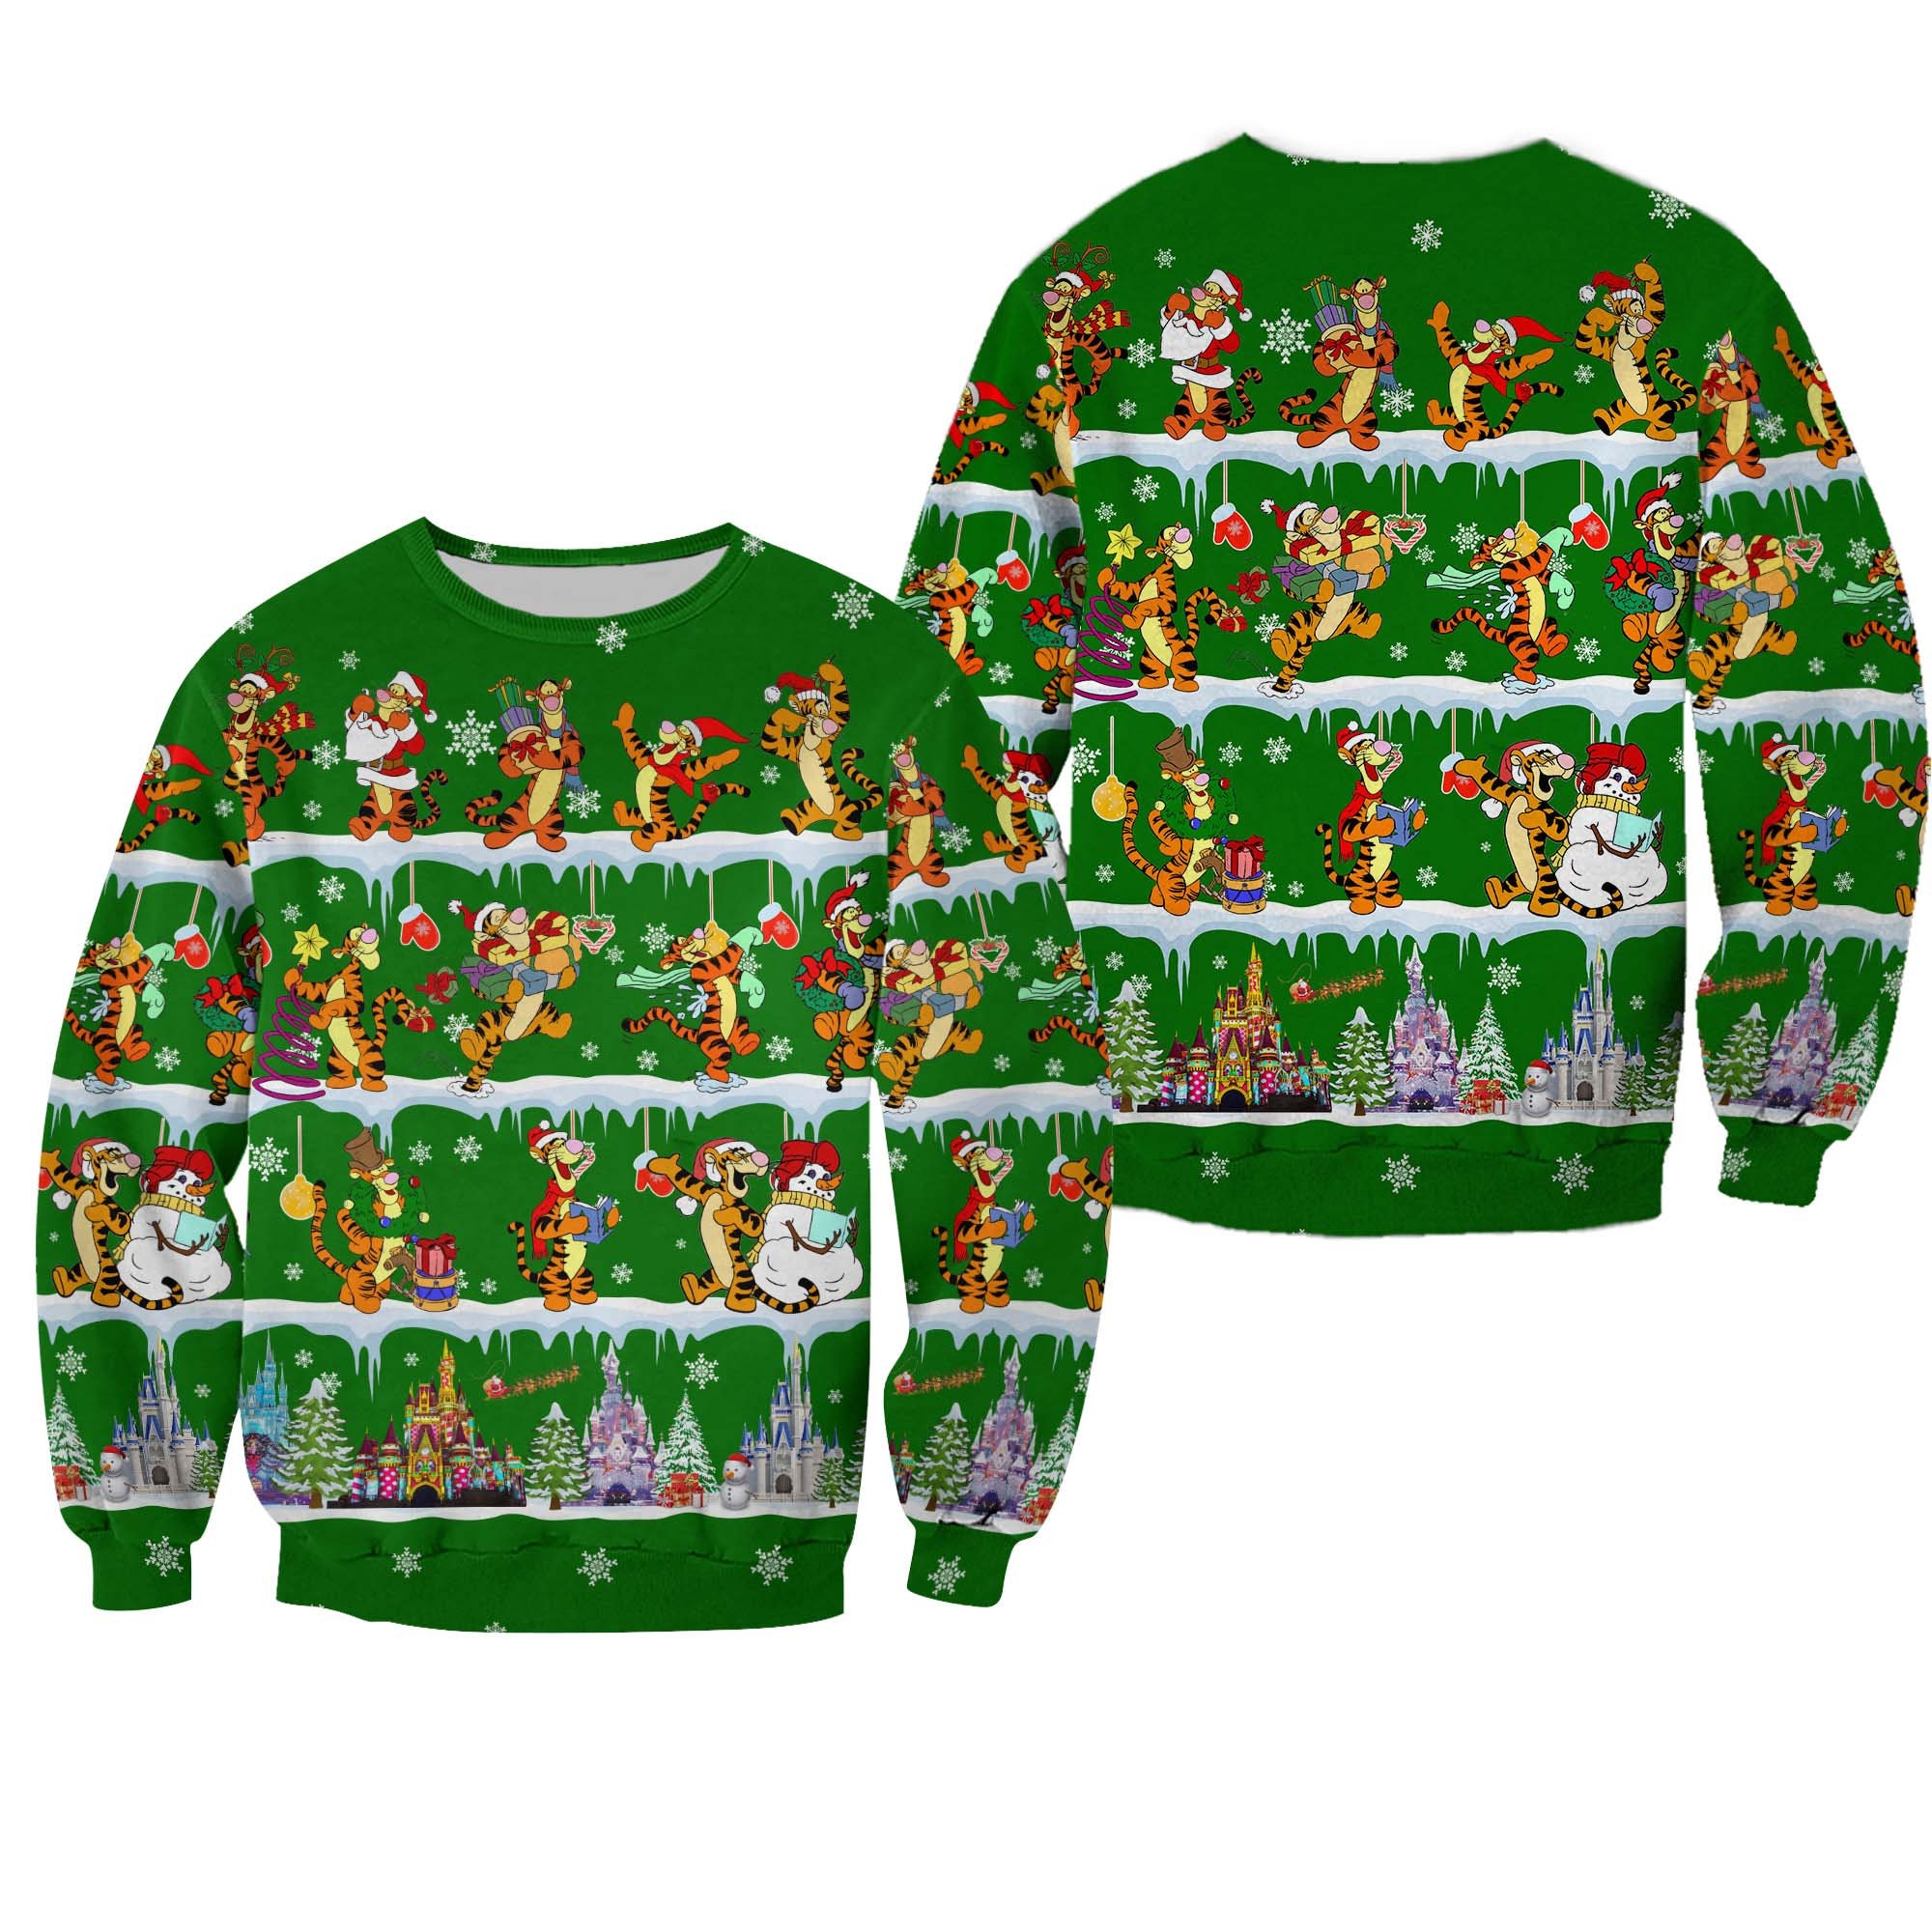 Discover Tigger Pattern Xmas Green 2022 Christmas Disney Graphic Cartoon Outfits Unisex Casual Cotton Crewneck Sweaters Clothing Men Women